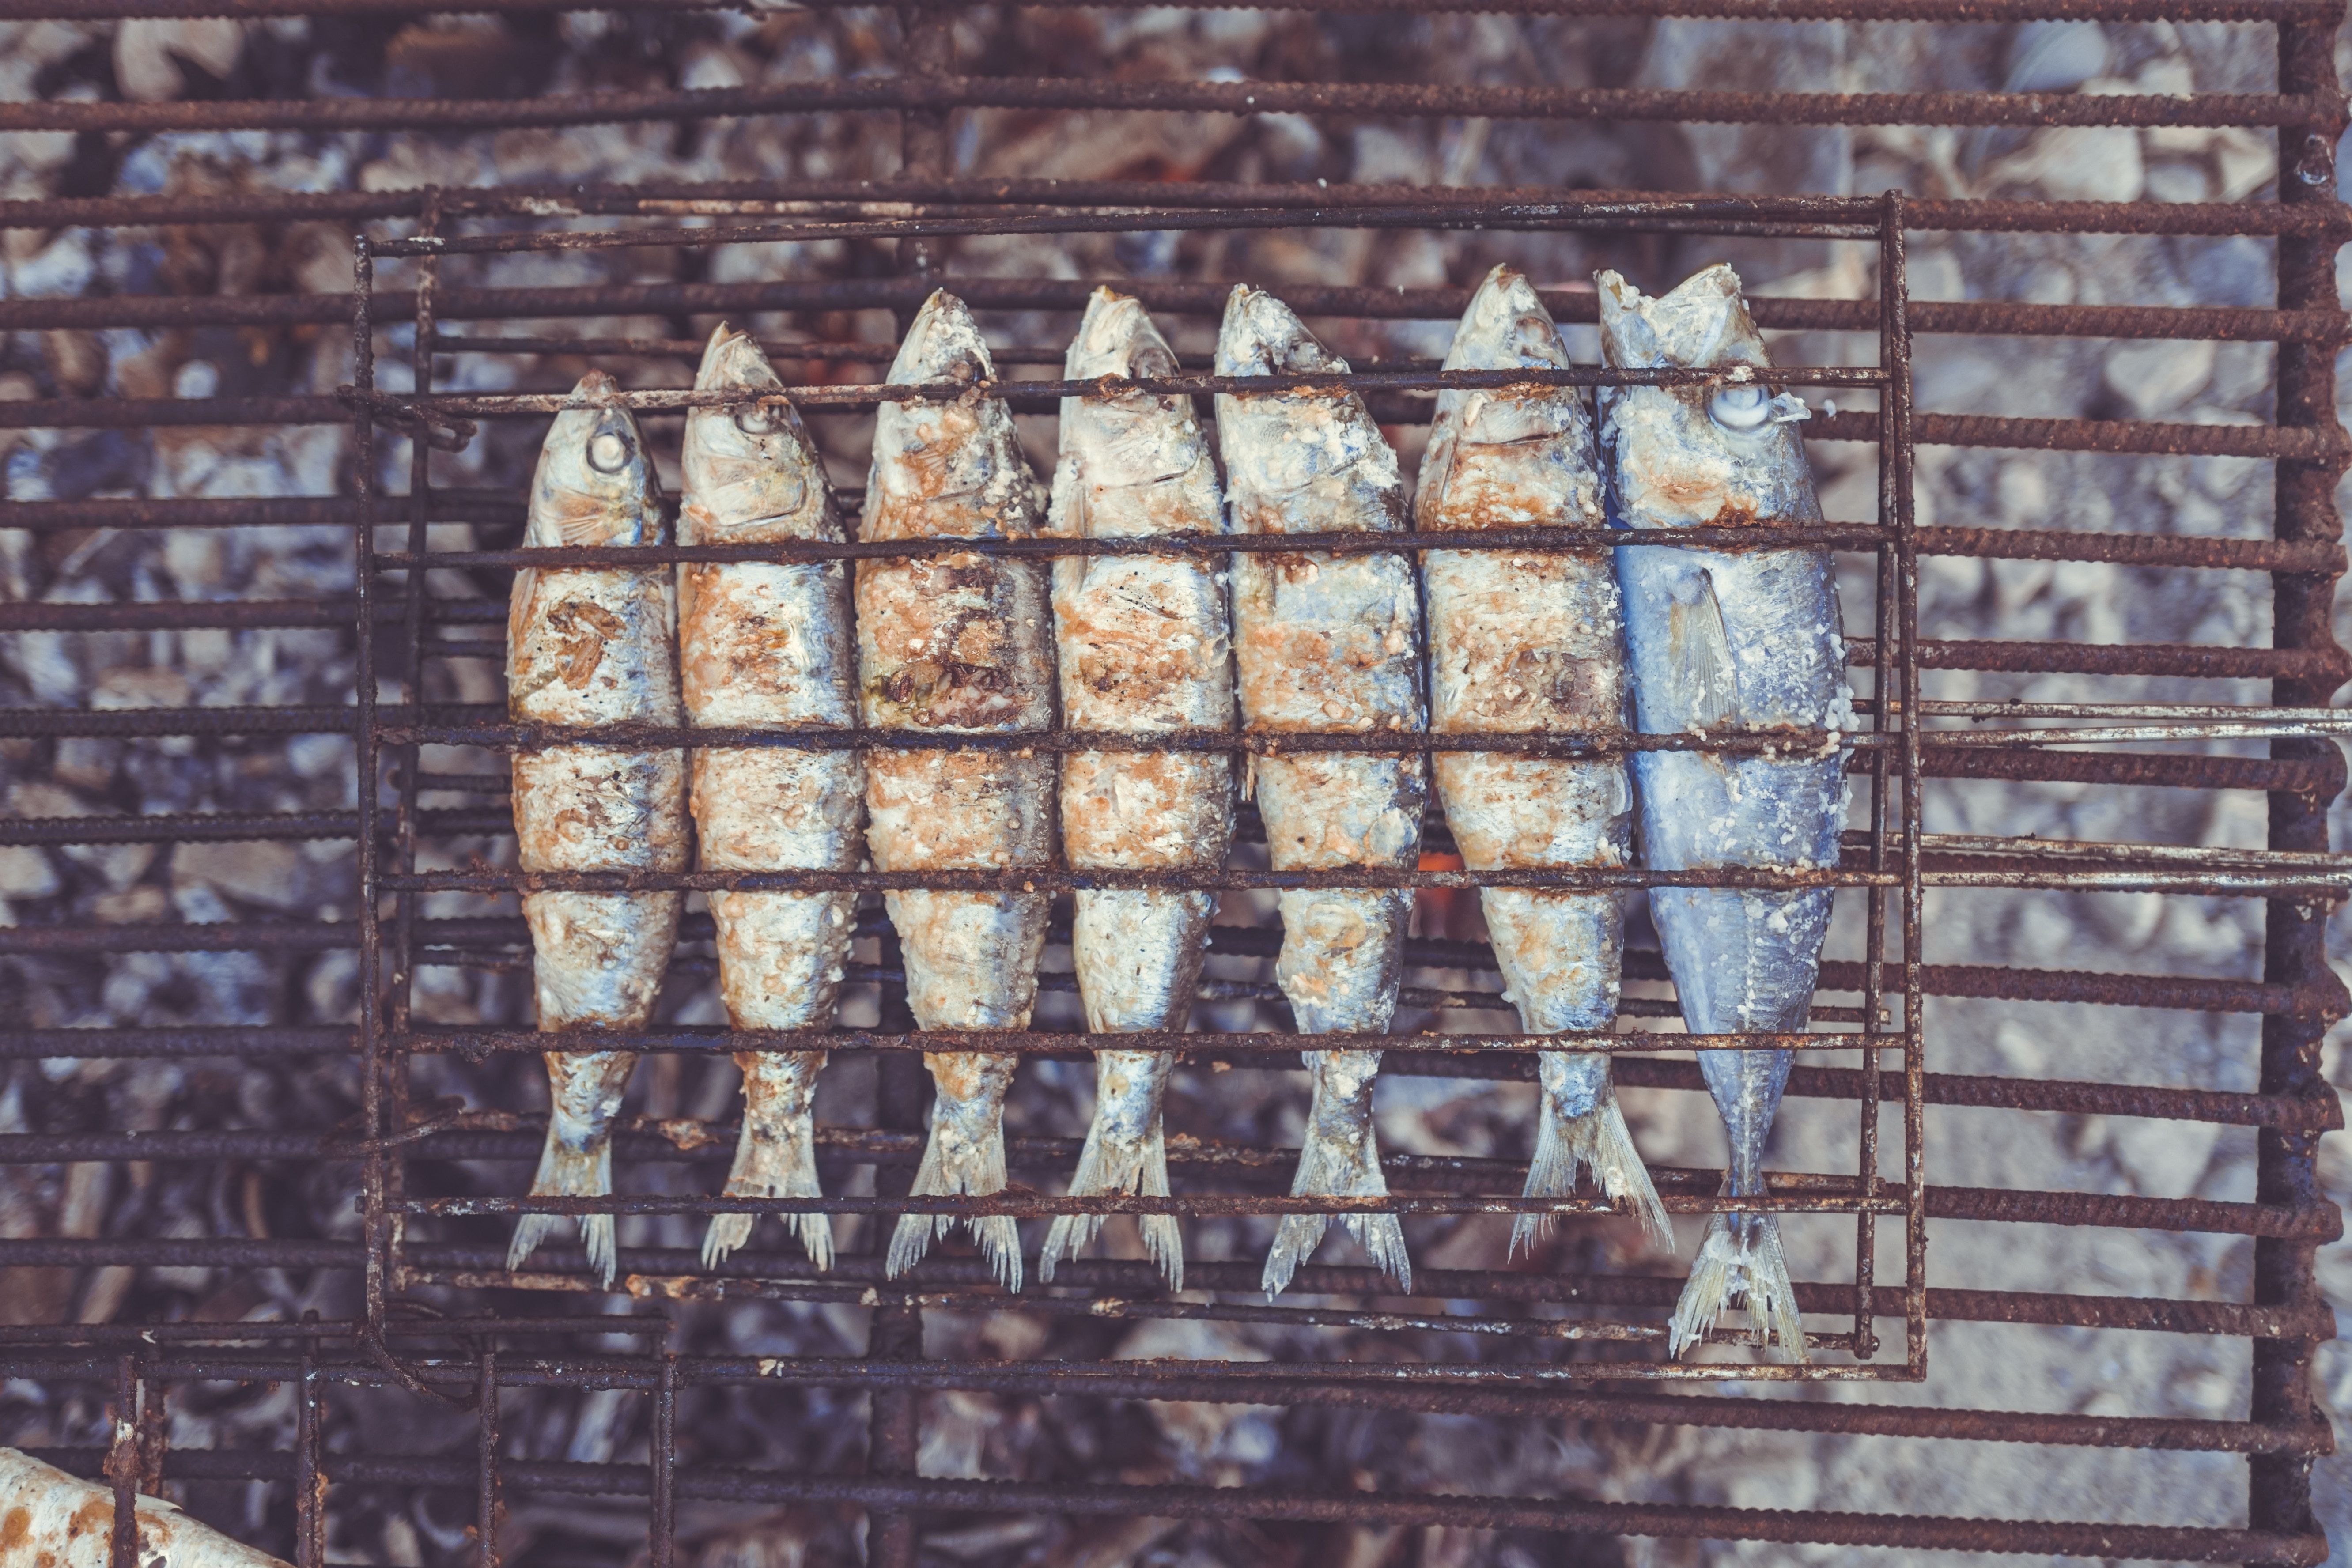 5326x3551 #cook, #outdoor, #sardine, #Free , #line, #cooking, #bbq, #ocean, #weekend, #food, #barbeque, #heat, #hot, #camping, # grill, #sea, #fish, #grilled fish. Mocah HD Wallpaper